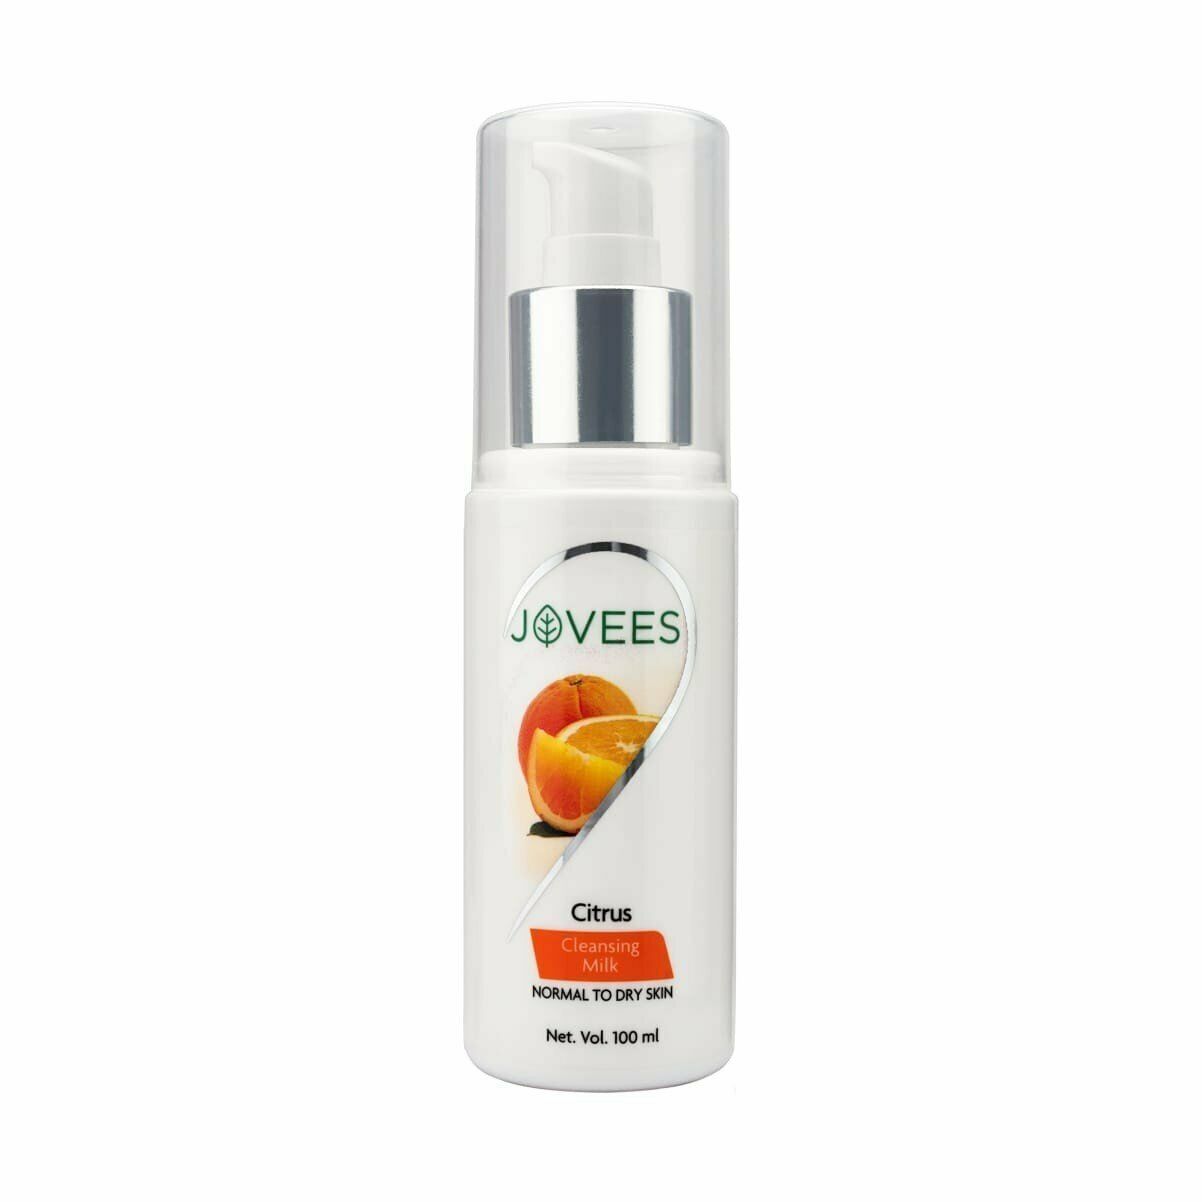 JOVEES CITRUS CLEANSING MILK For Normal to Dry skin 100ml